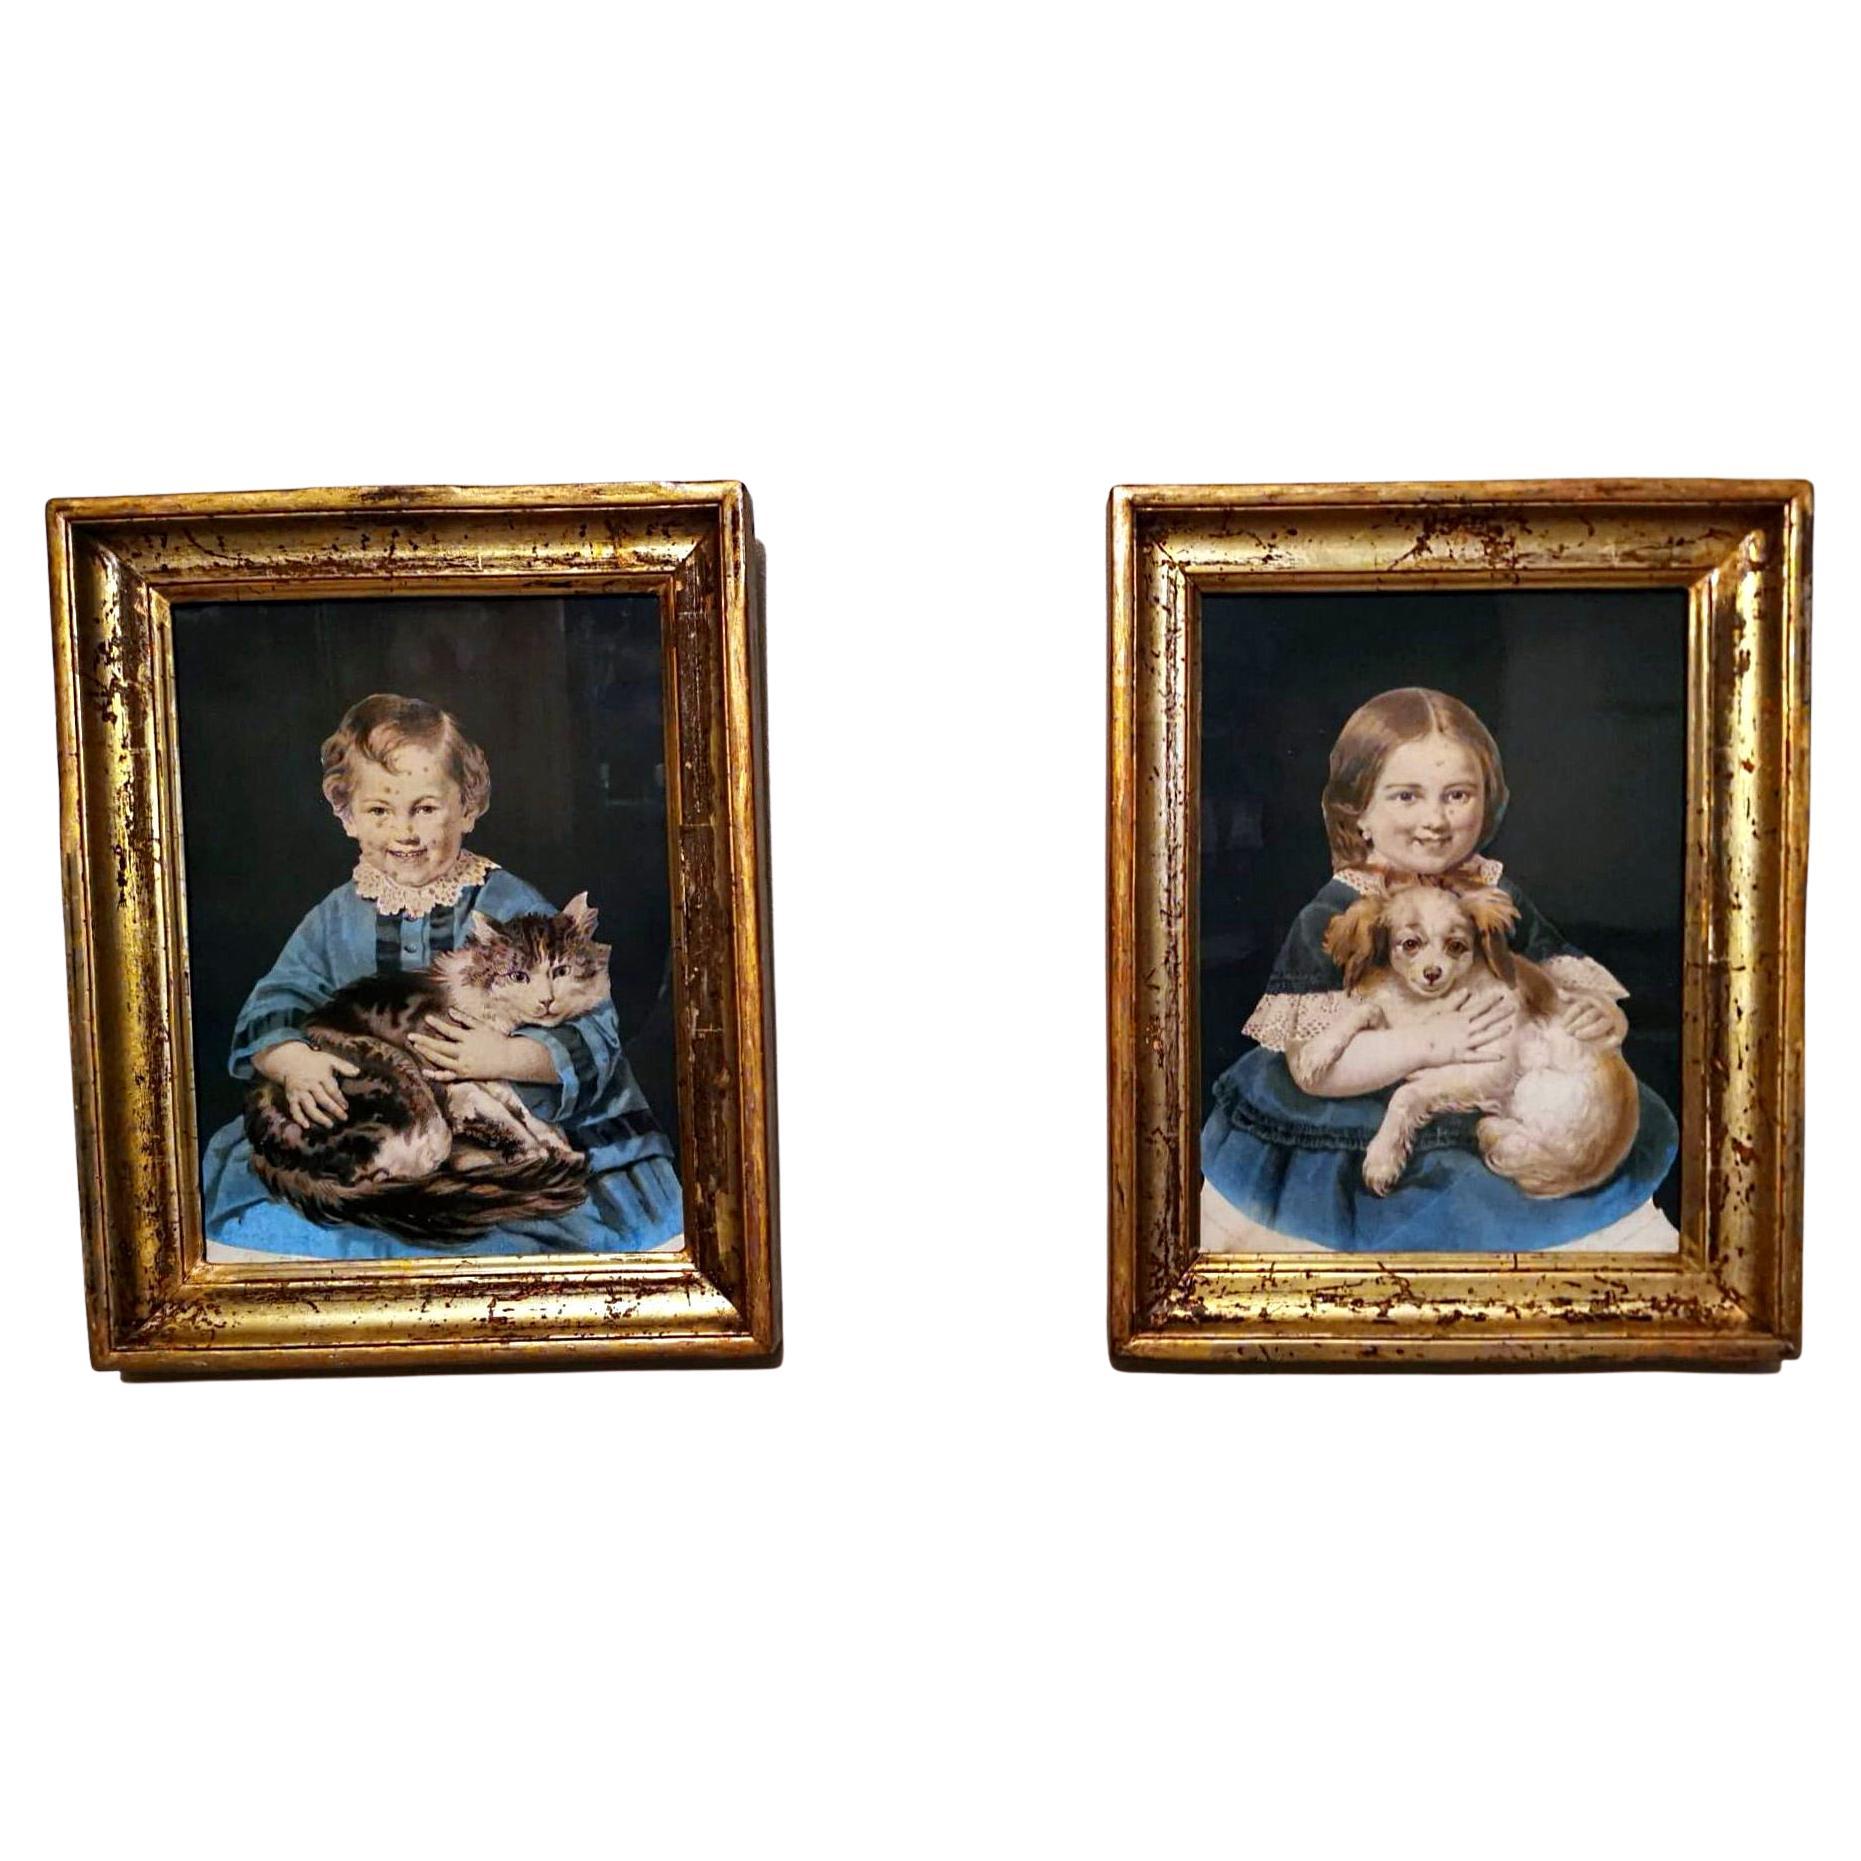 Regnier, Bettanier, Morlon, French Color Lithographs With Period Gold Leaf Frame For Sale